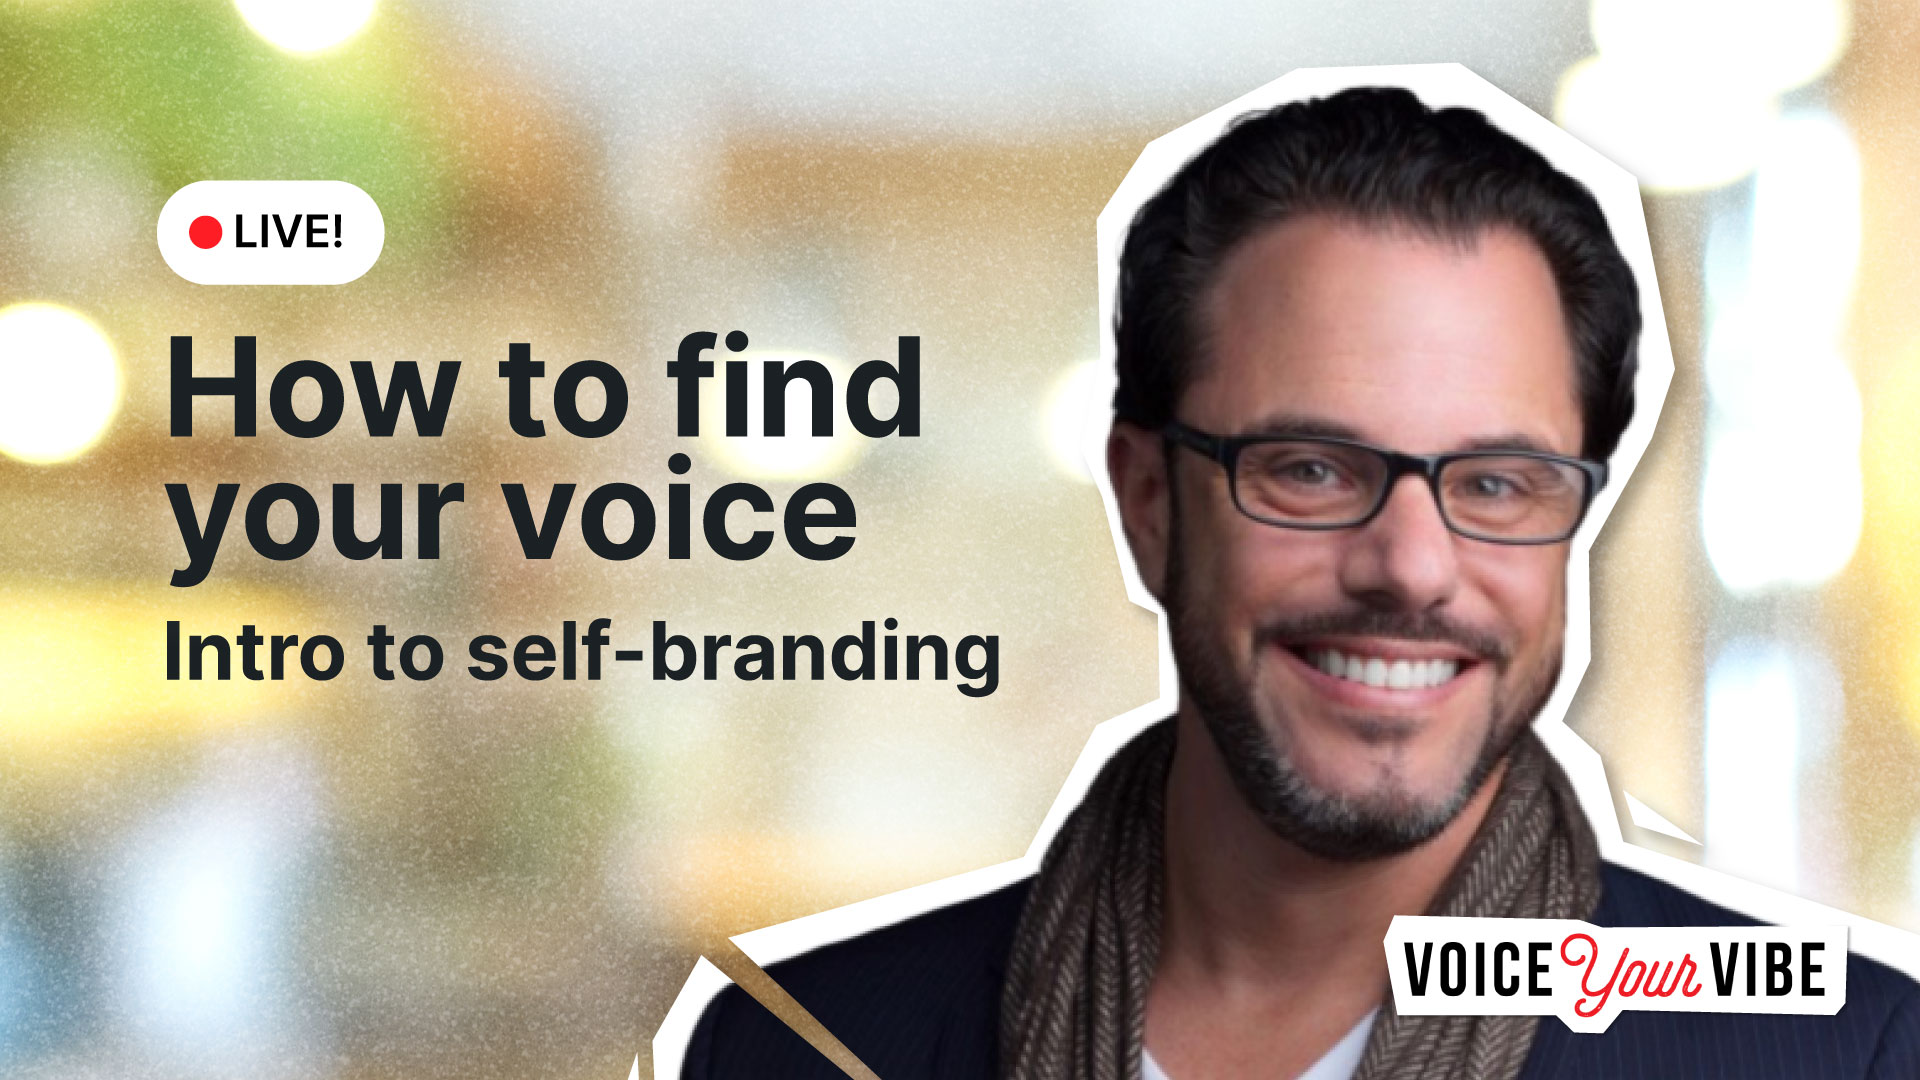 LIVE: How to find your voice - Intro to self-branding